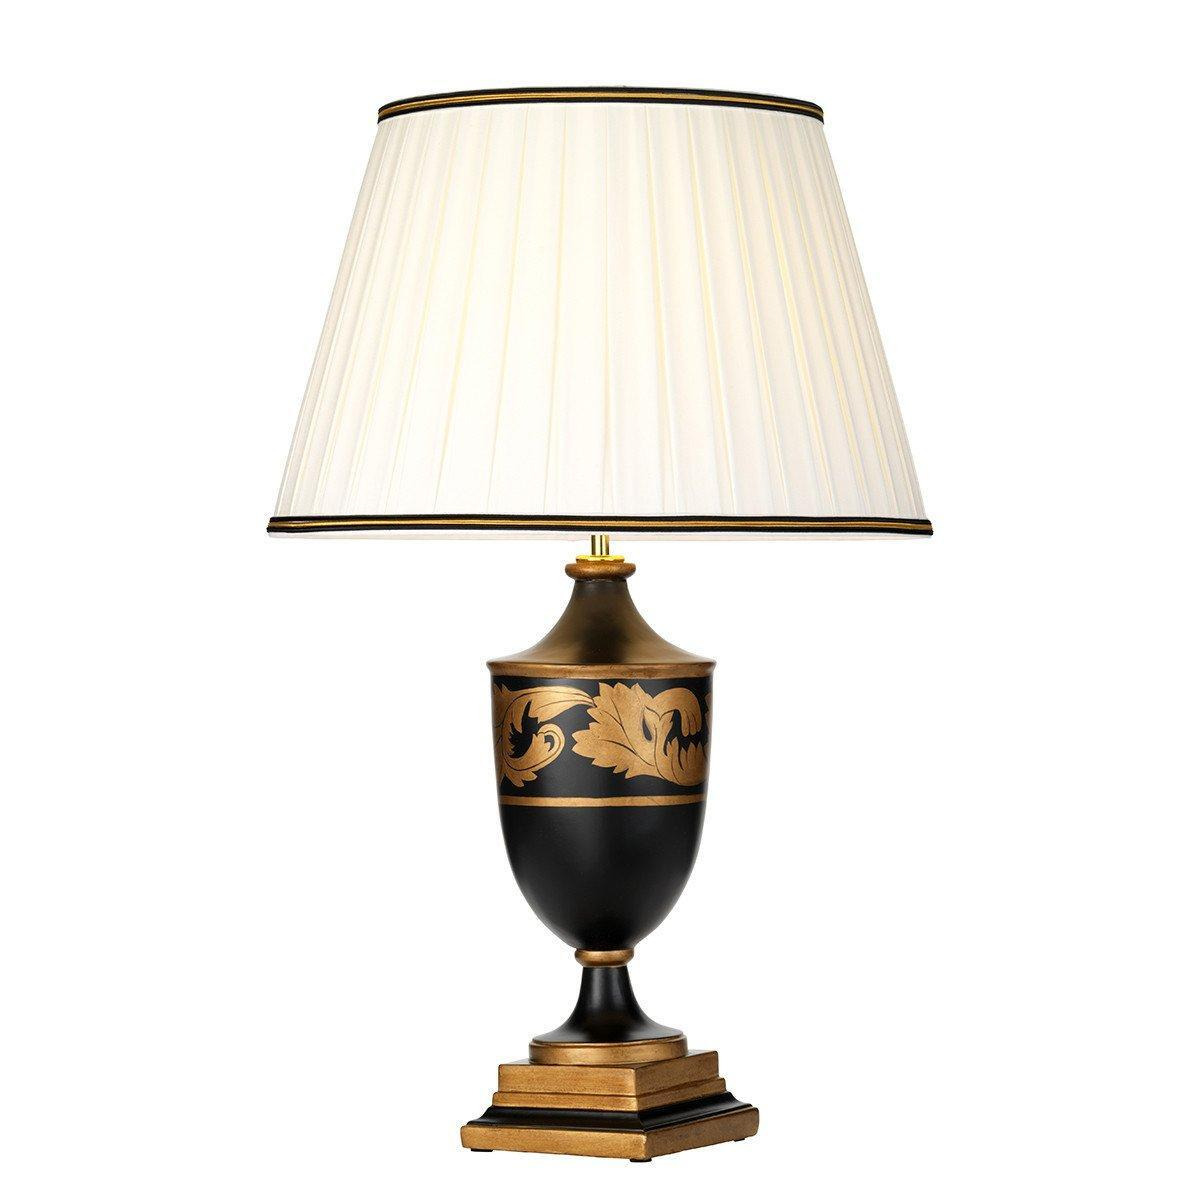 Narbonne 1 Light Table Lamp Black Wood Urn With Tall Empire Cotton Shade - image 1